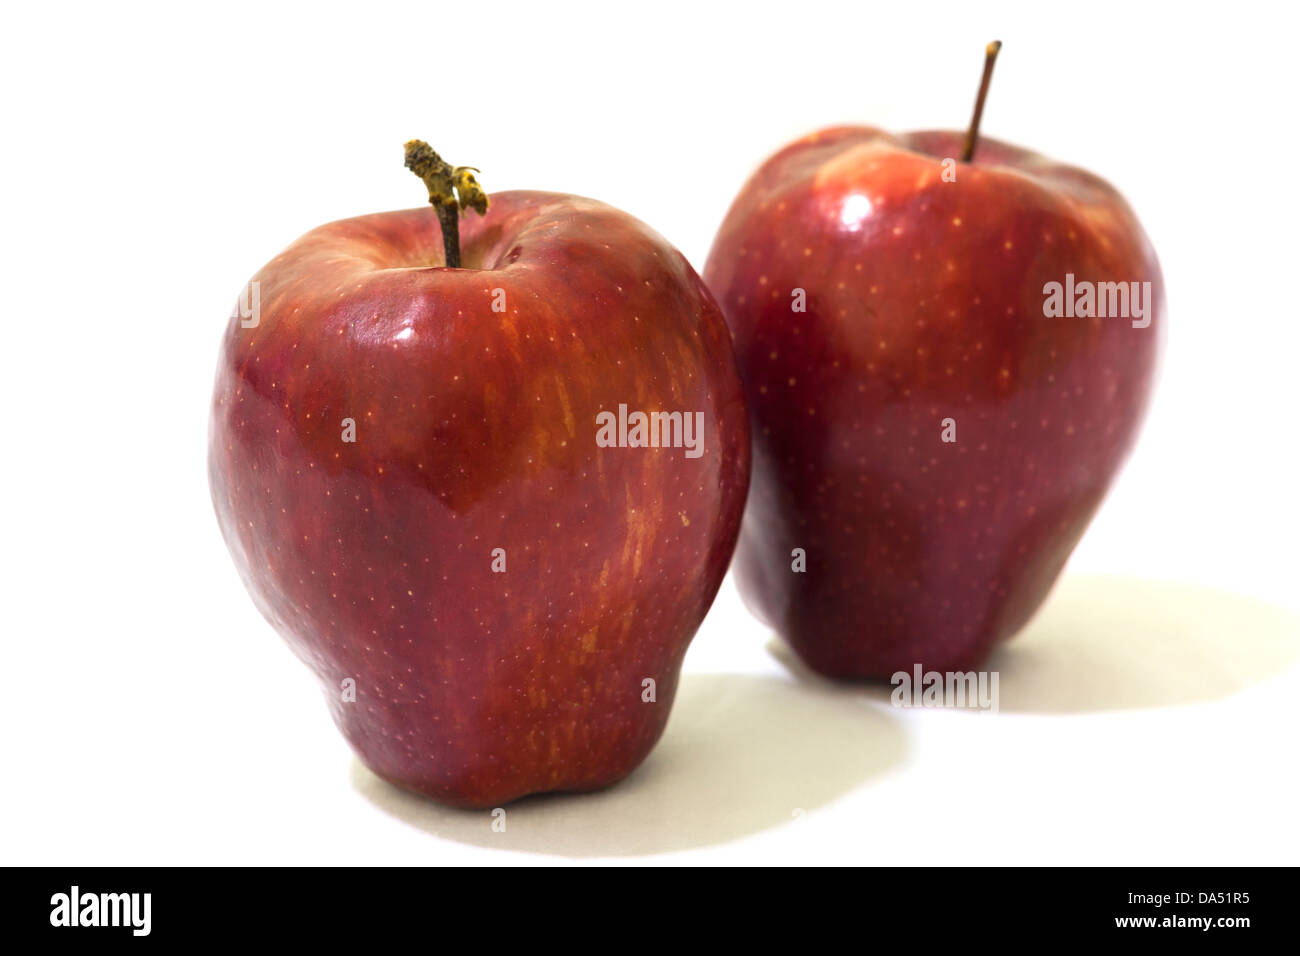 red apple fresh and nice ready to eat Stock Photo